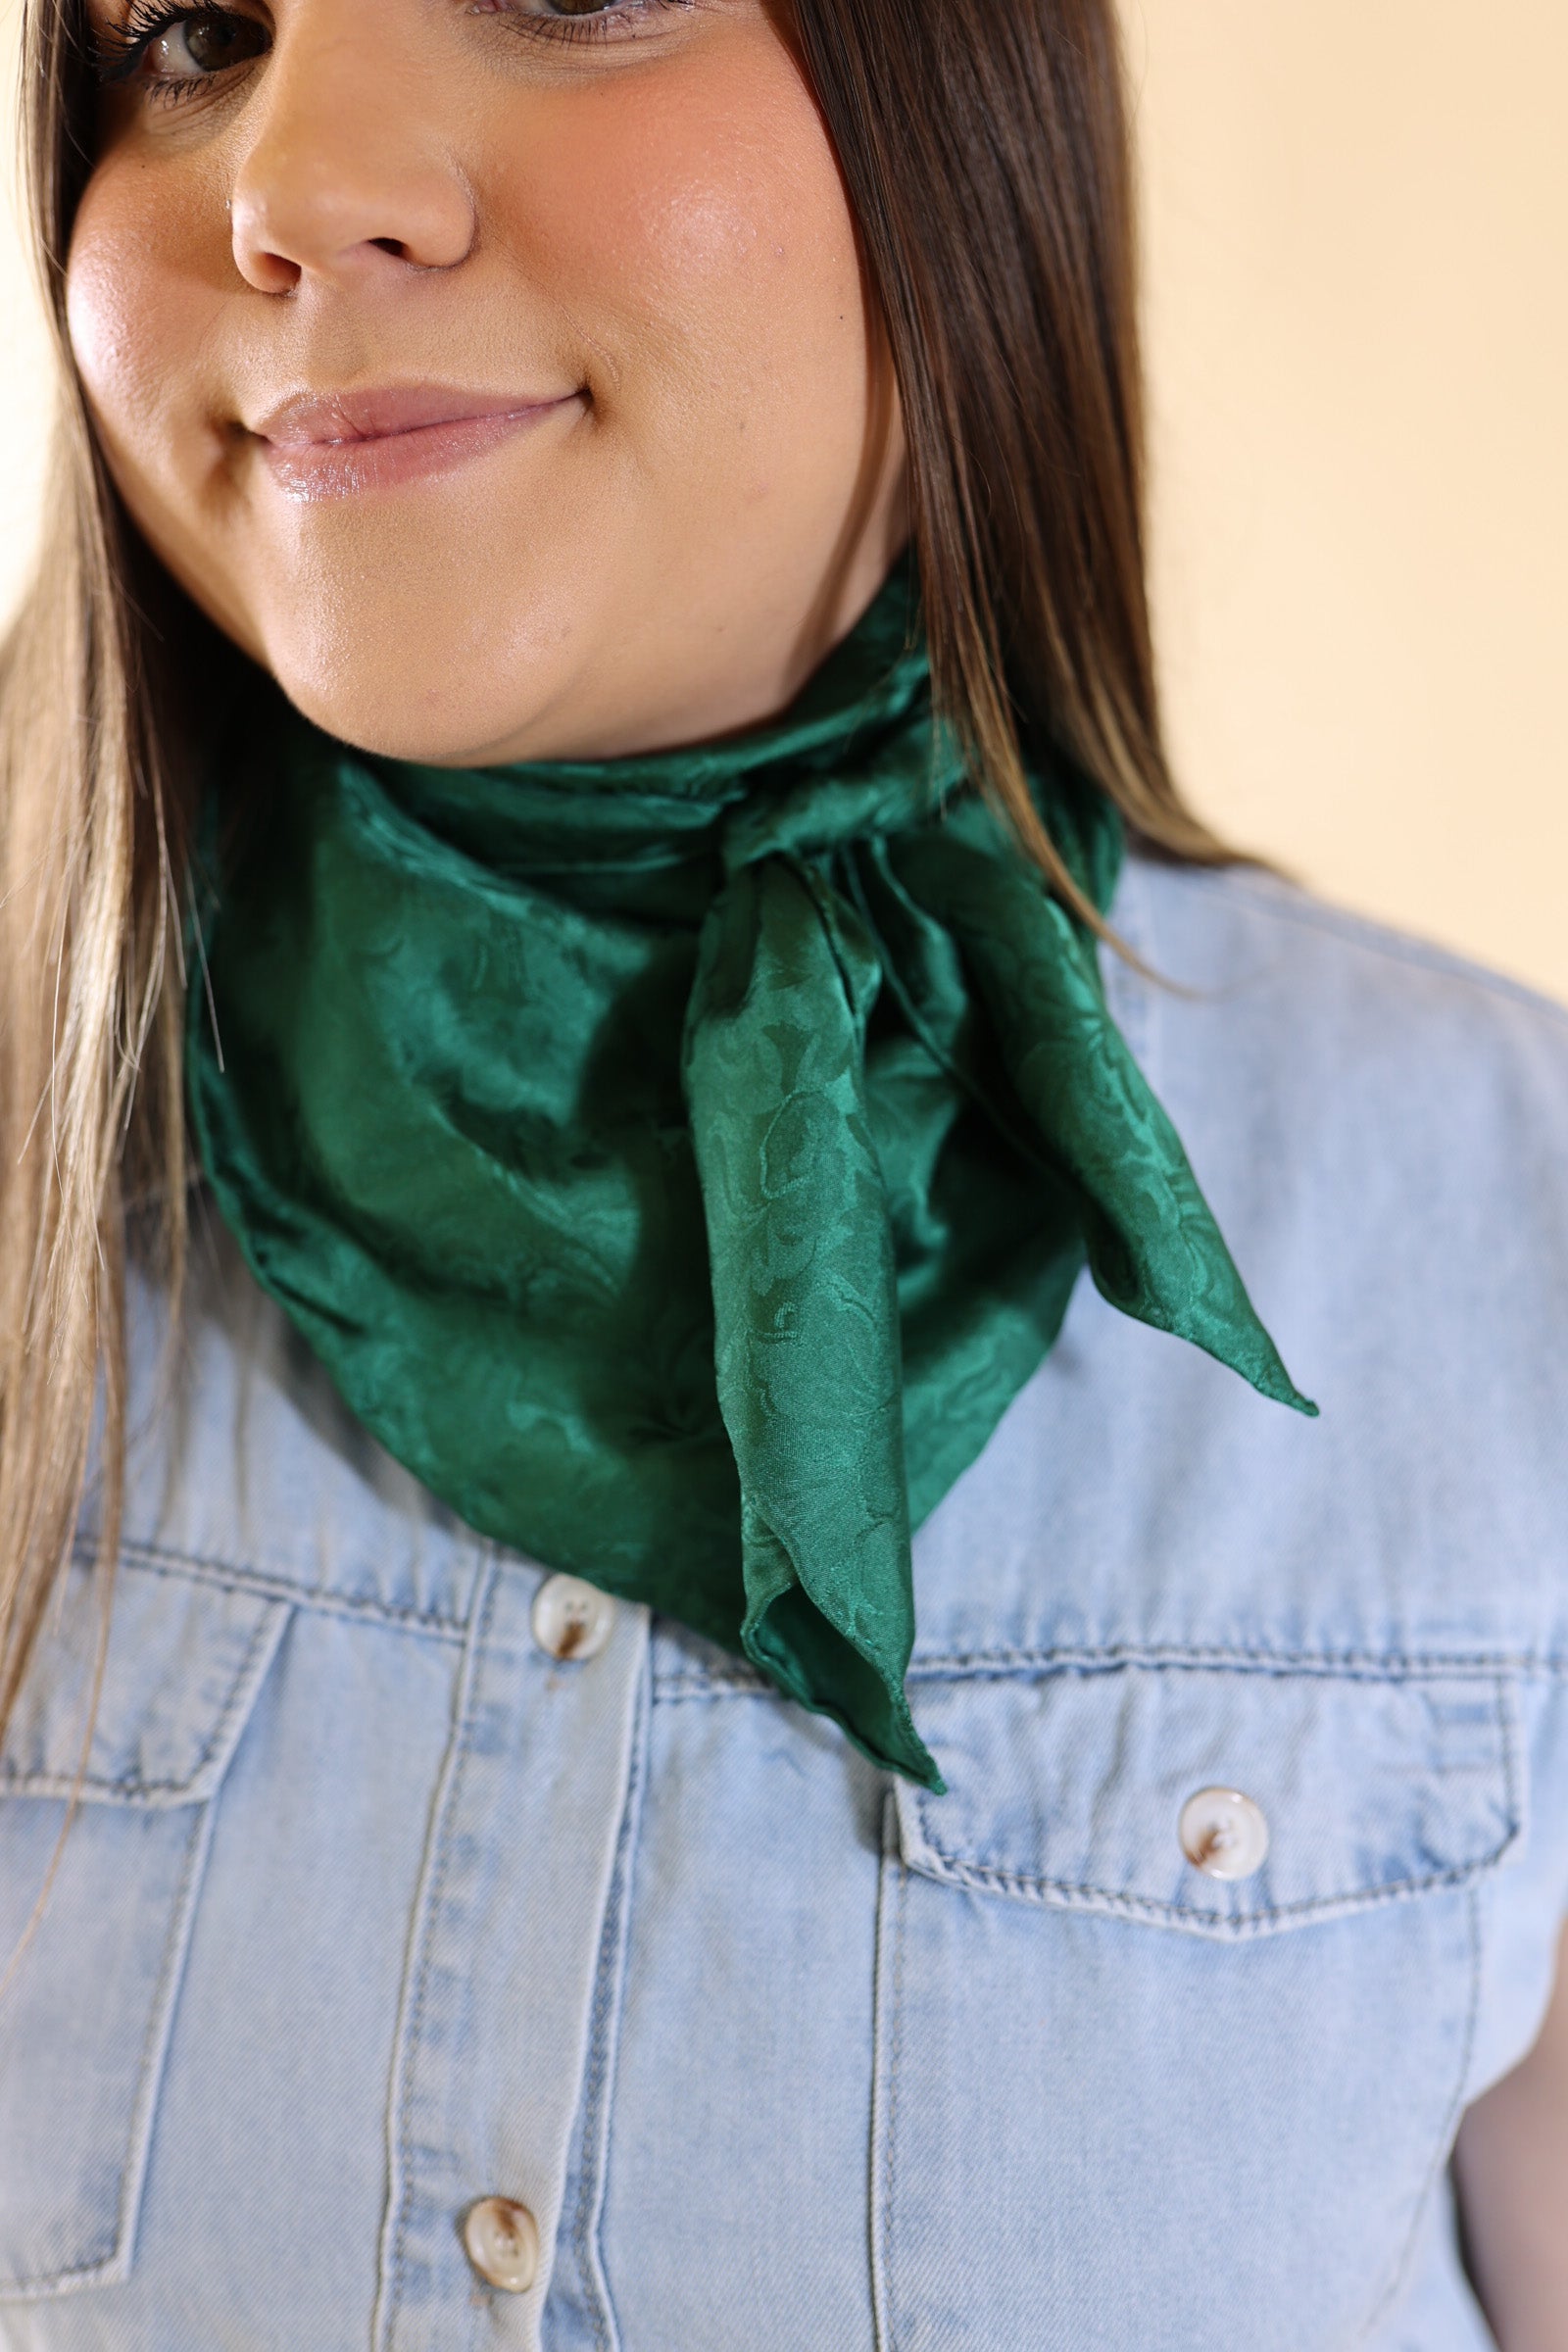 Jacquard Wild Rag in Forest Green - Giddy Up Glamour Boutique